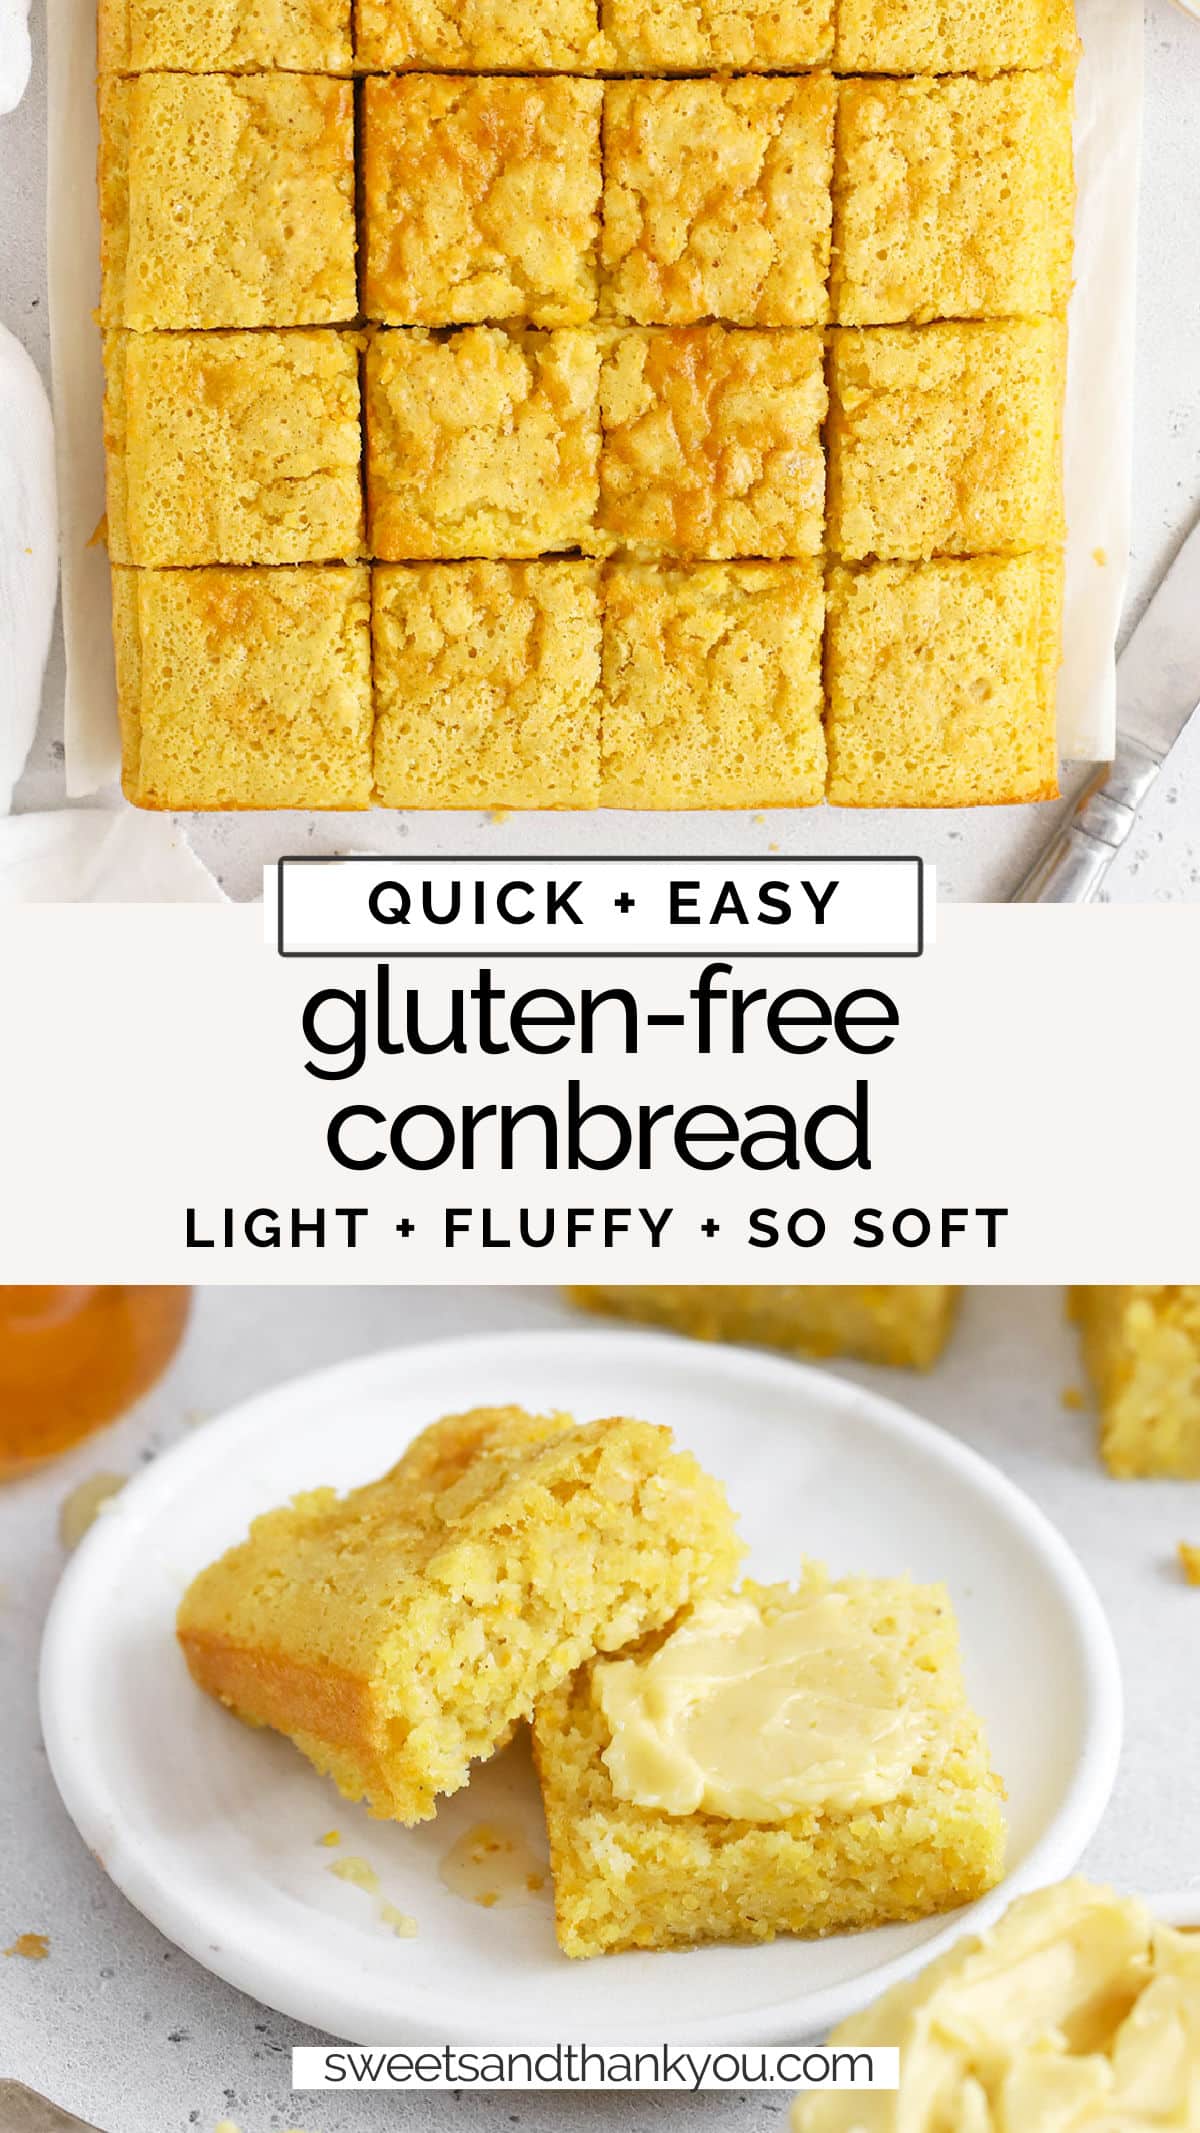 Easy Gluten-Free Cornbread - This is the BEST gluten-free cornbread recipe we've ever tried. Fluffy, moist, perfectly sweet & easy to make! / fluffy gluten-free cornbread / easy gluten-free cornbread recipe / delicious gluten-free cornbread recipe / how to make gluten-free cornbread, step by step / is cornbread gluten-free / easy gluten-free corn bread recipe / moist gluten-free cornbread / sweet gluten-free cornbread / gluten-free cornbread from scratch // gluten-free cornbread without a mix